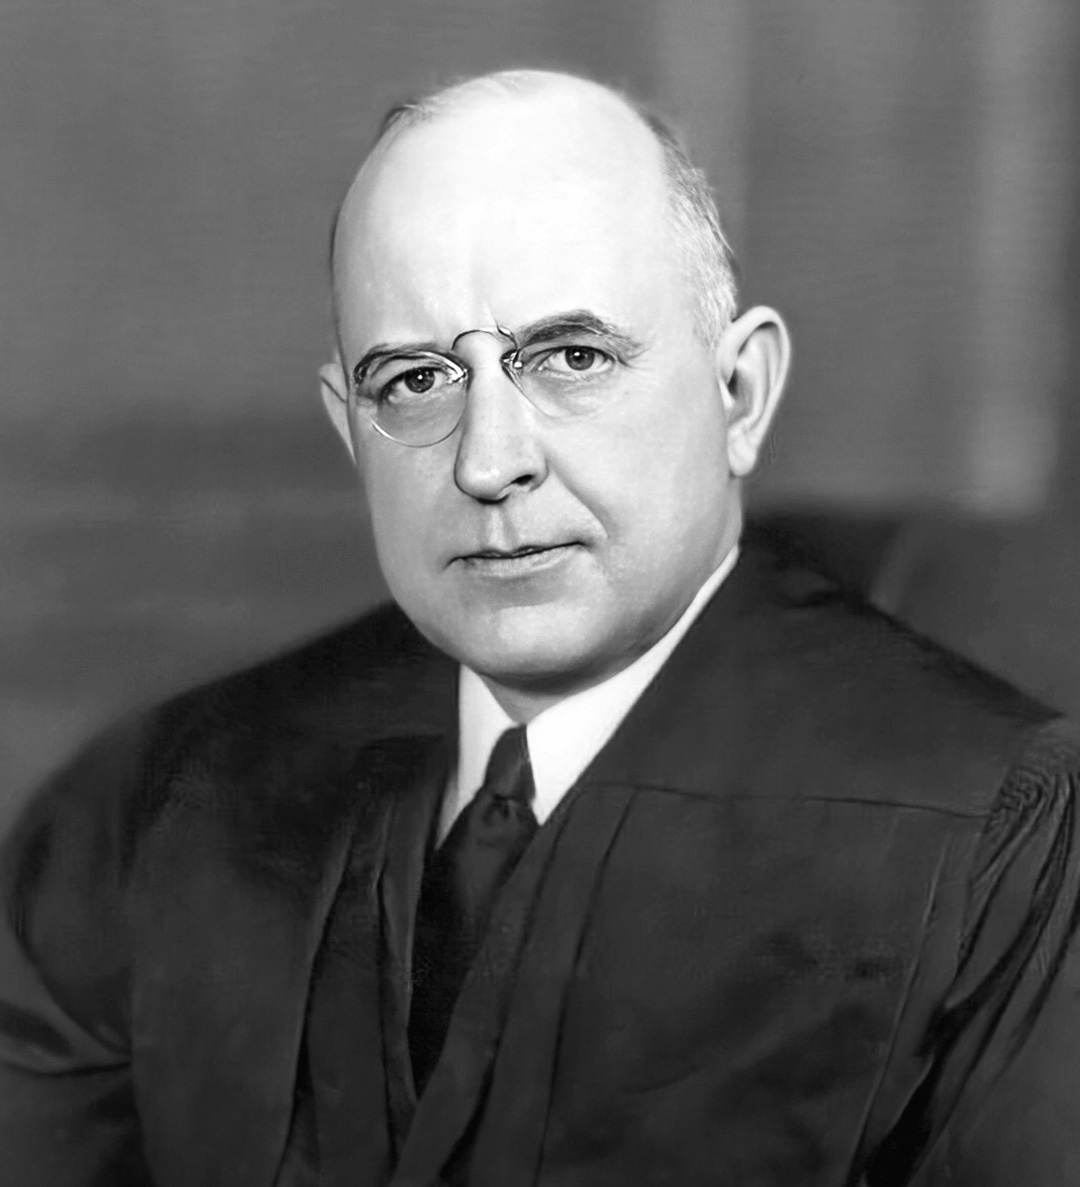 Justice Stanley Reed. Supreme Court of the United States.